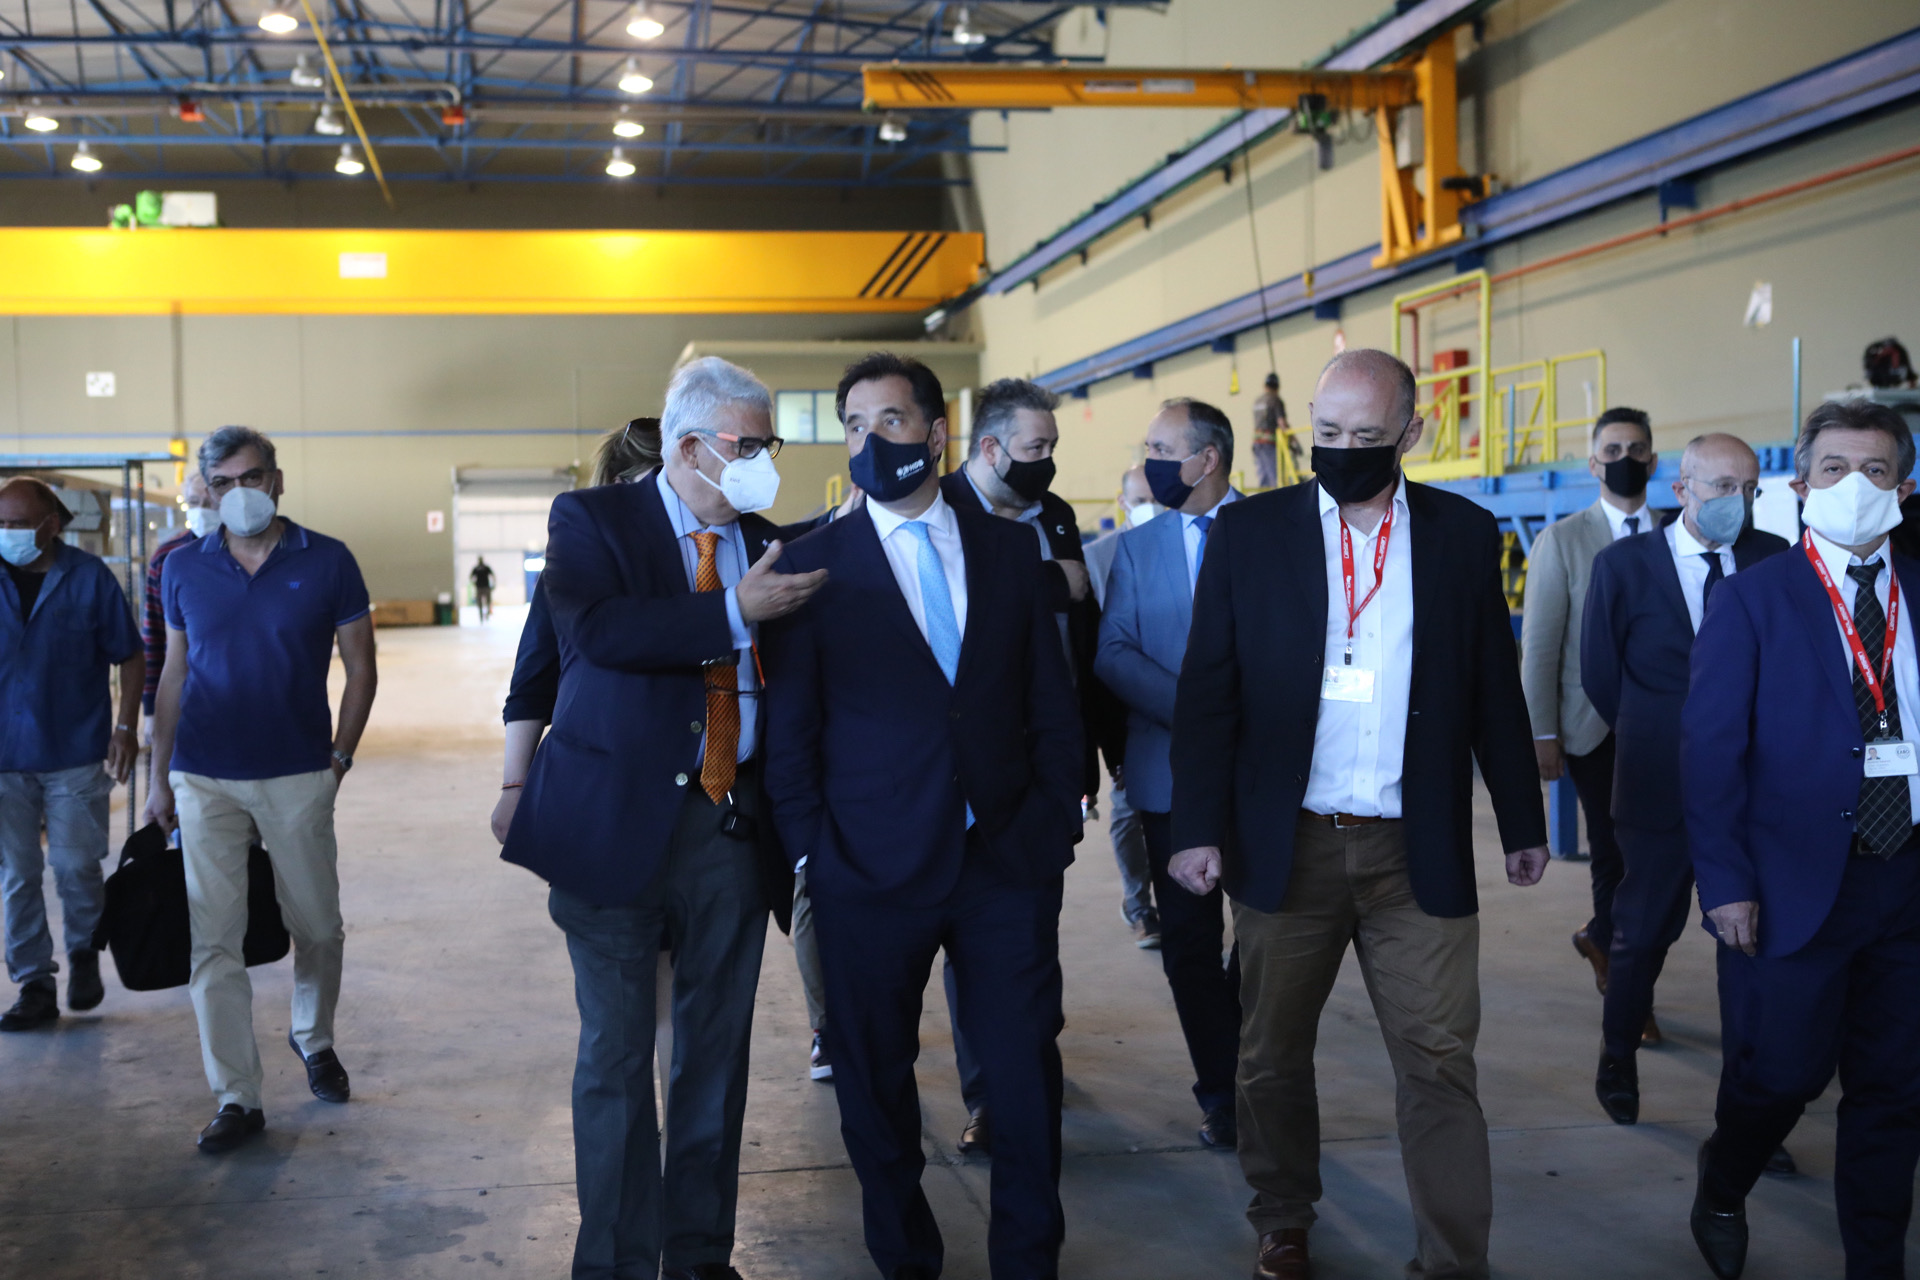 Minister tours bus, military vehicle plant in Thessaloniki sold to Israeli consortium